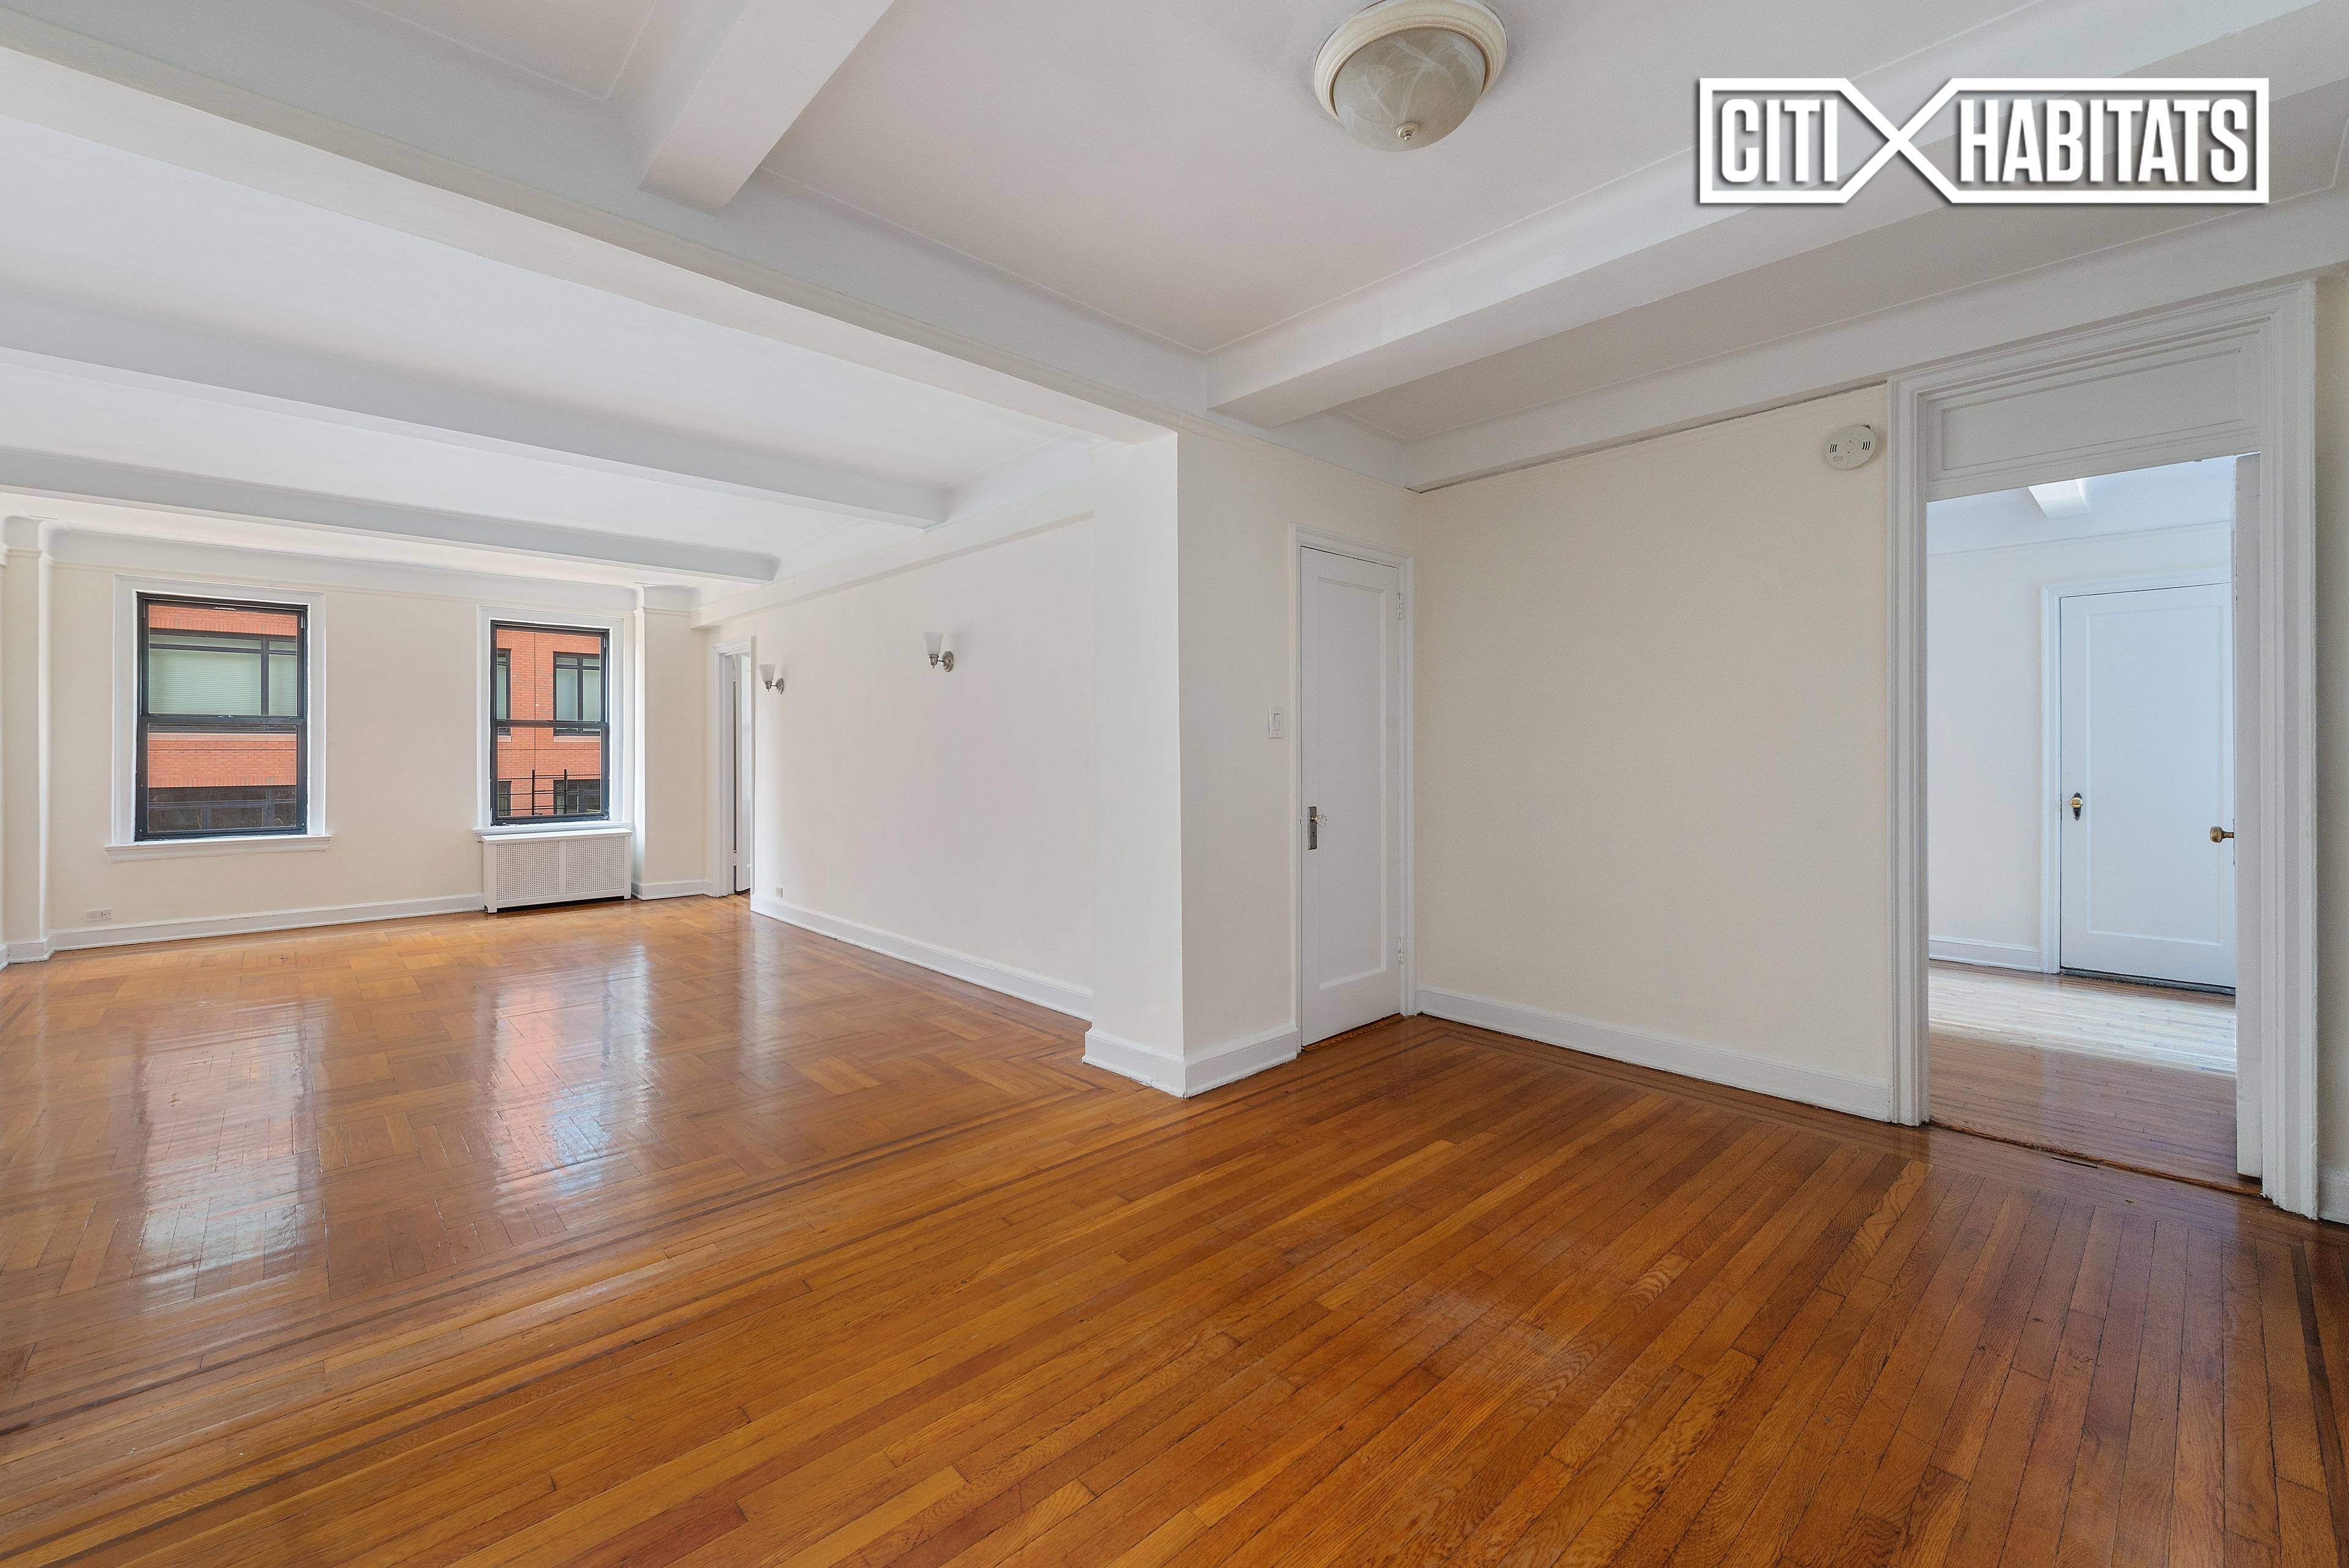 Pre War Doorman Property Located in the Heart of the Upper West Side, West 77th Street.